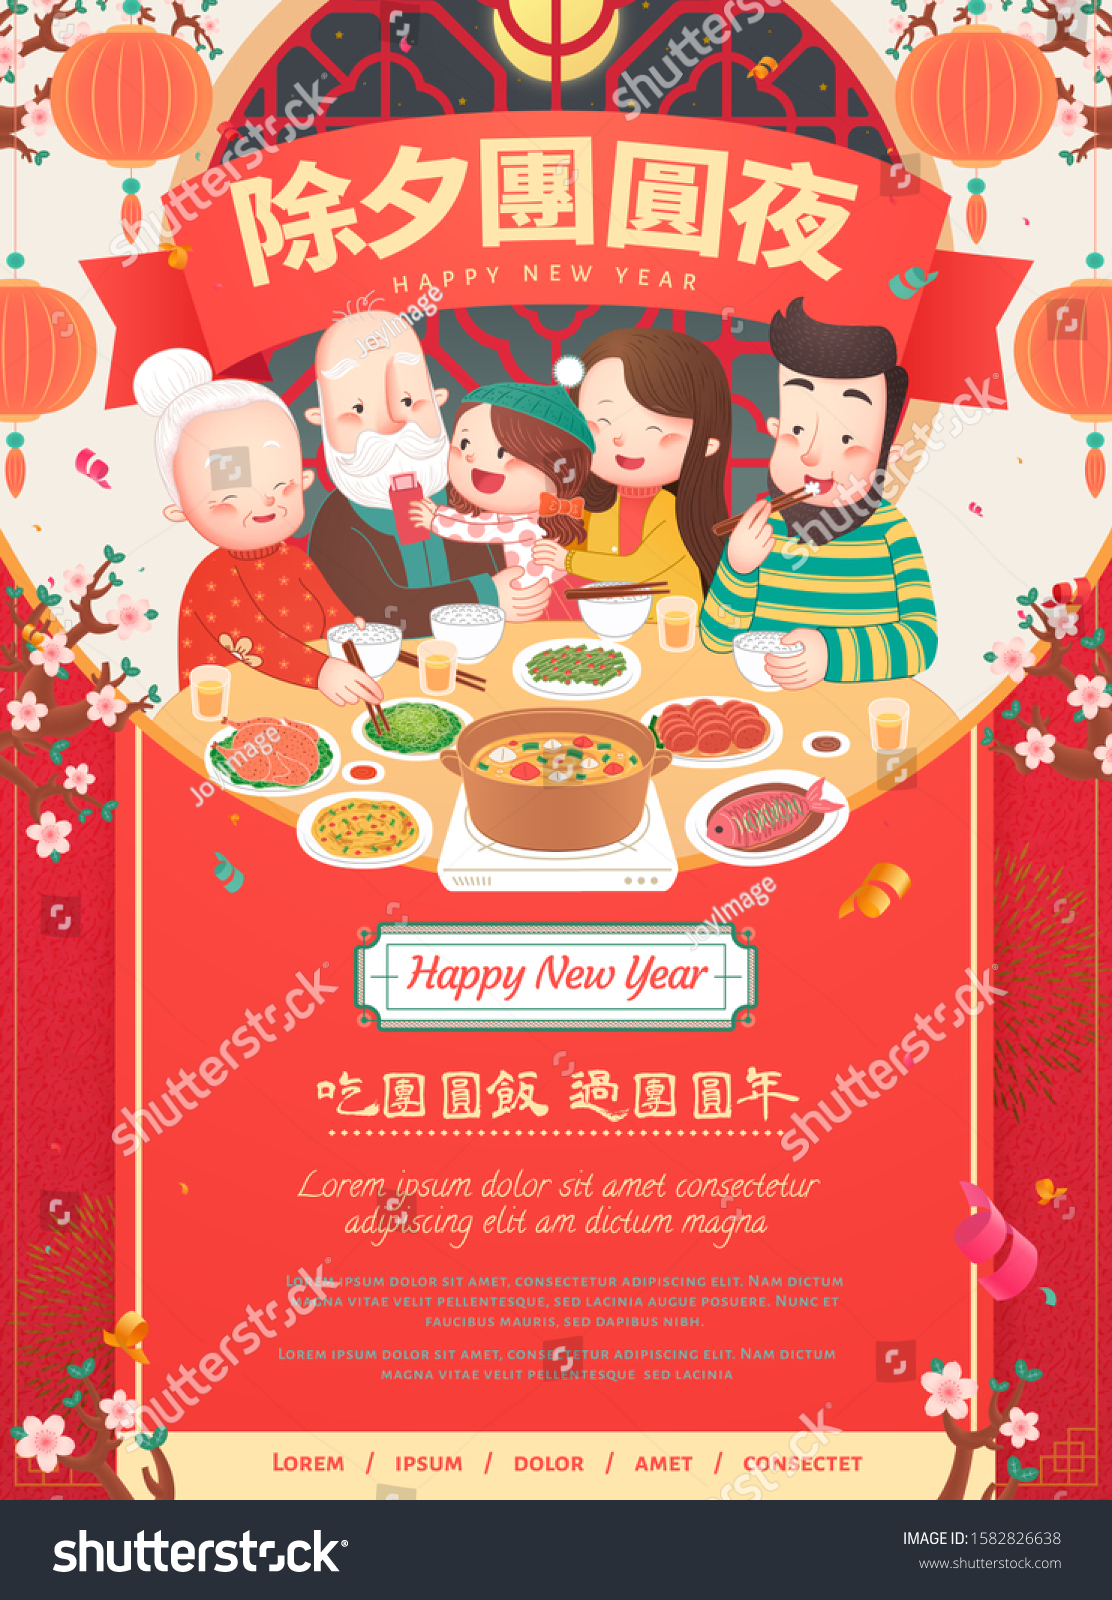 SVG of Family reunion dinner poster, Chinese text translation: new year's eve reunion and have a perfect year svg